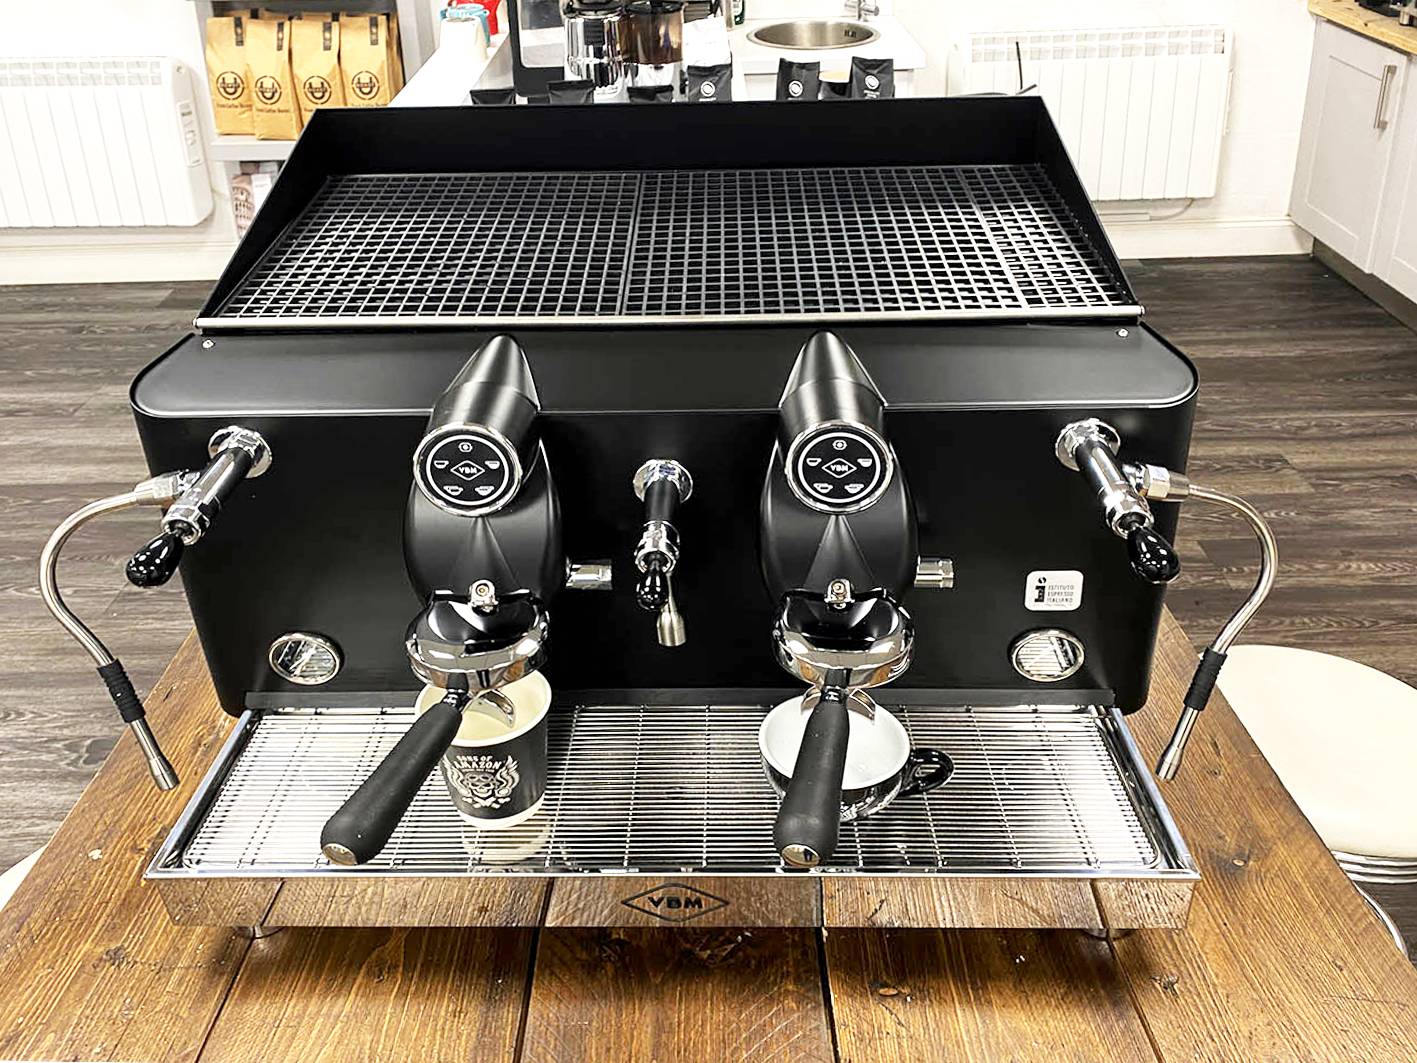 https://for-sale.used-secondhand.co.uk/media/secondhand/images/82214/professional-coffee-machine-vbm-lollo-2-group-espresso-machine-new-glasg/vbm-lollo-2-group-espresso-machine-259.jpg